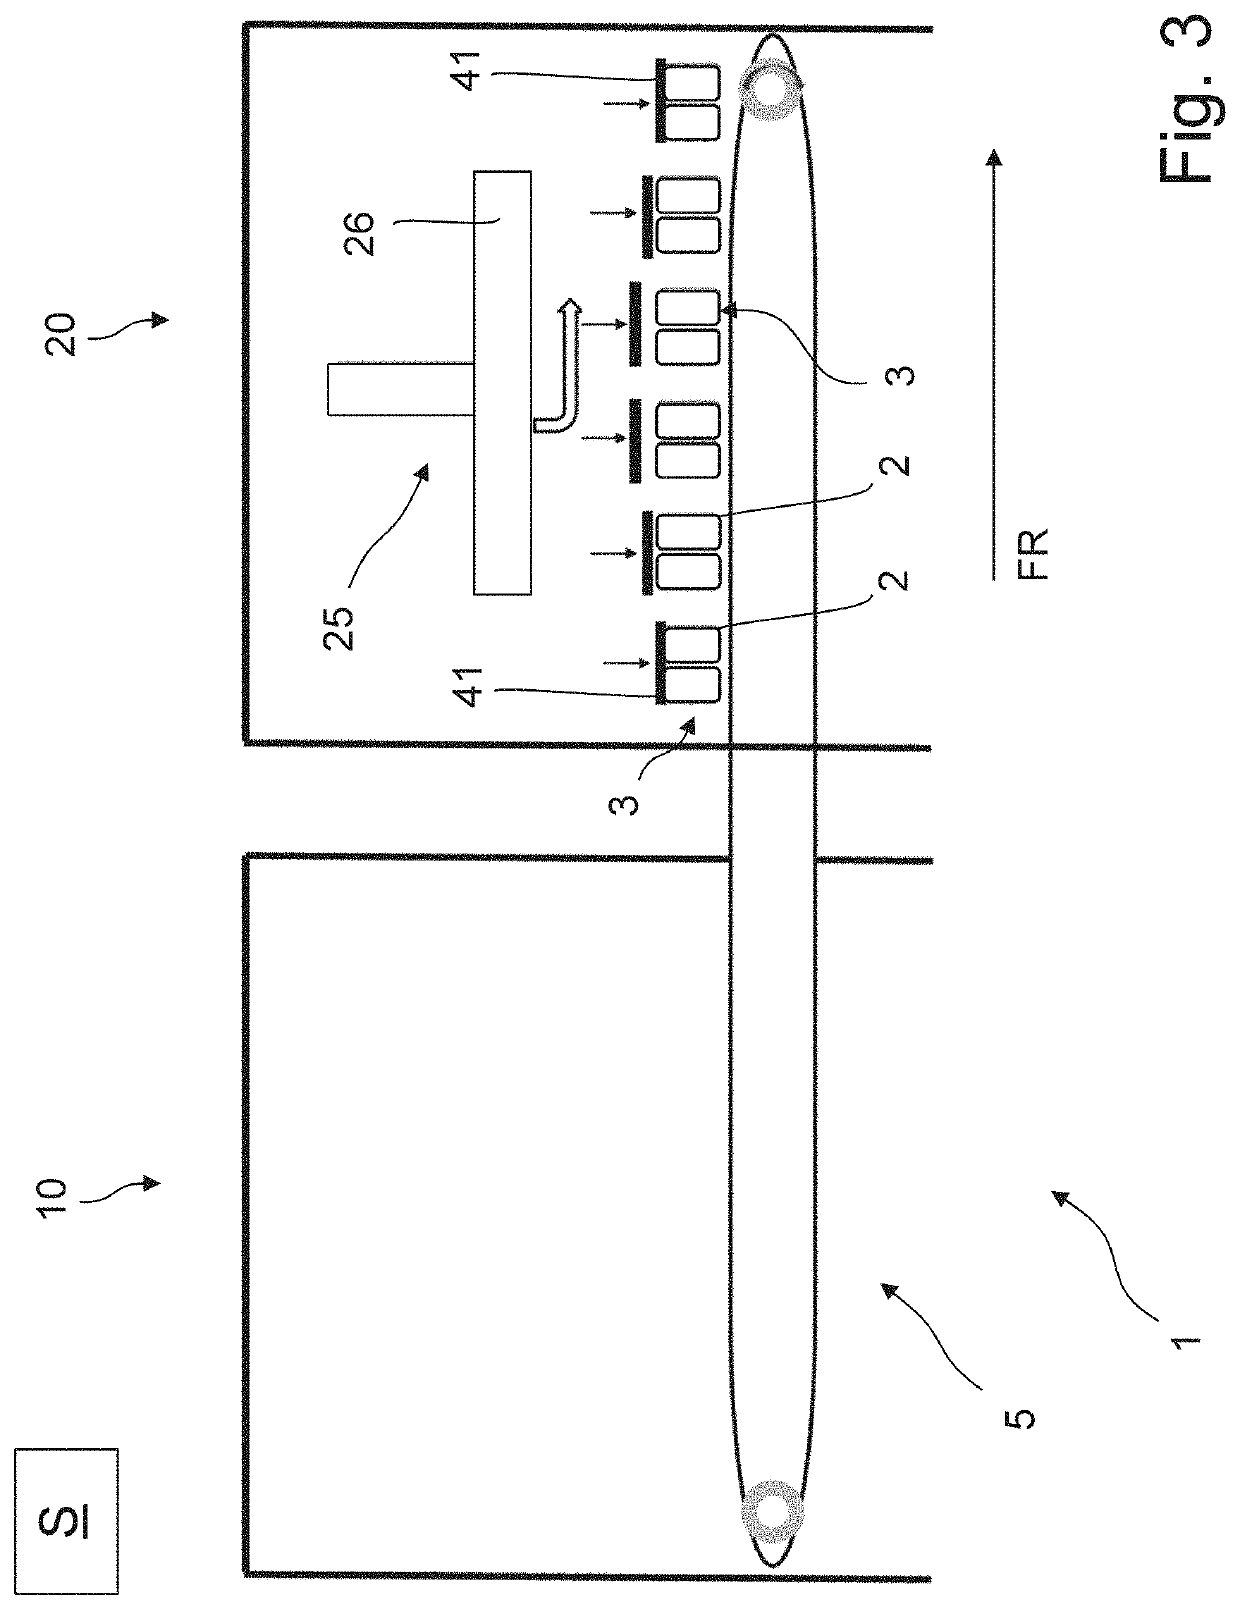 Method and apparatus for producing a multipack with several beverage containers